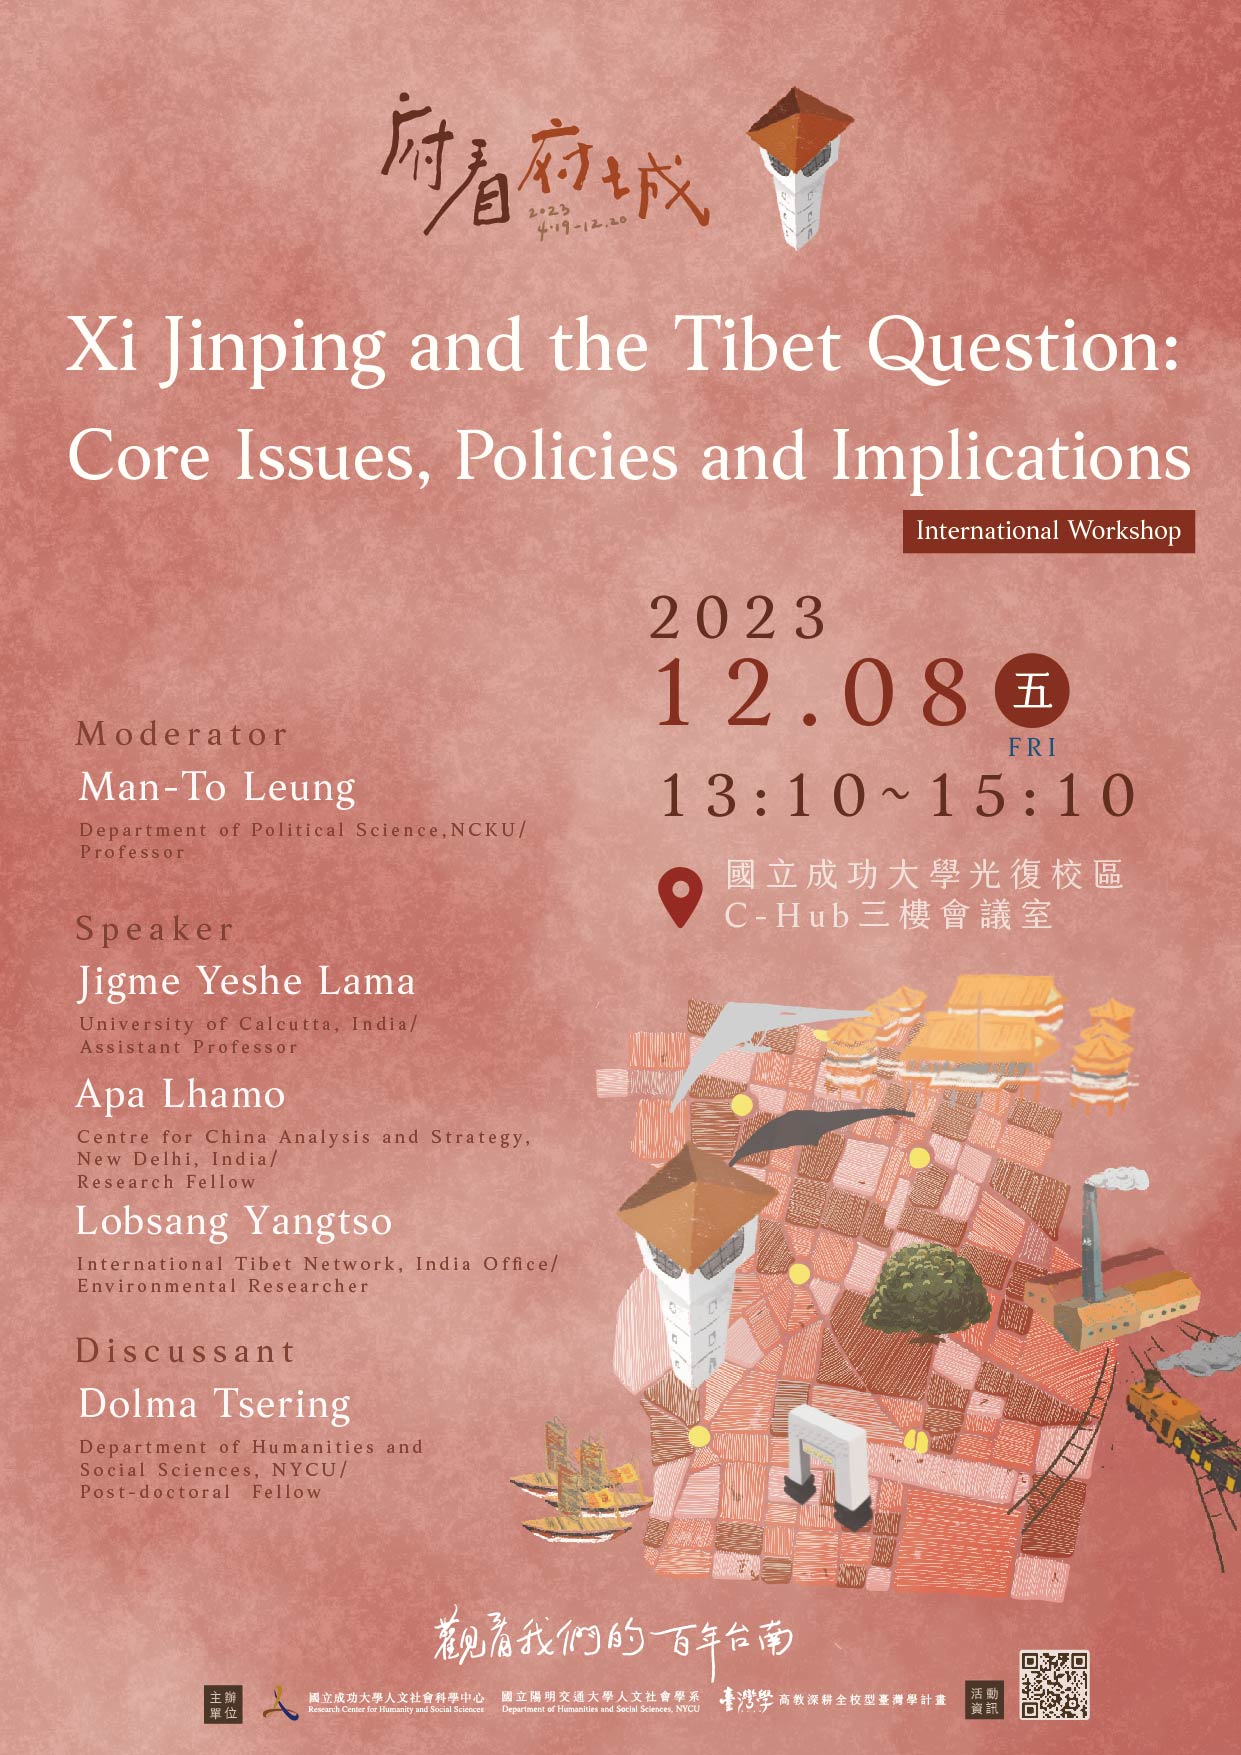 Xi Jinping and the Tibet Question: Core Issues, Policies and Implications